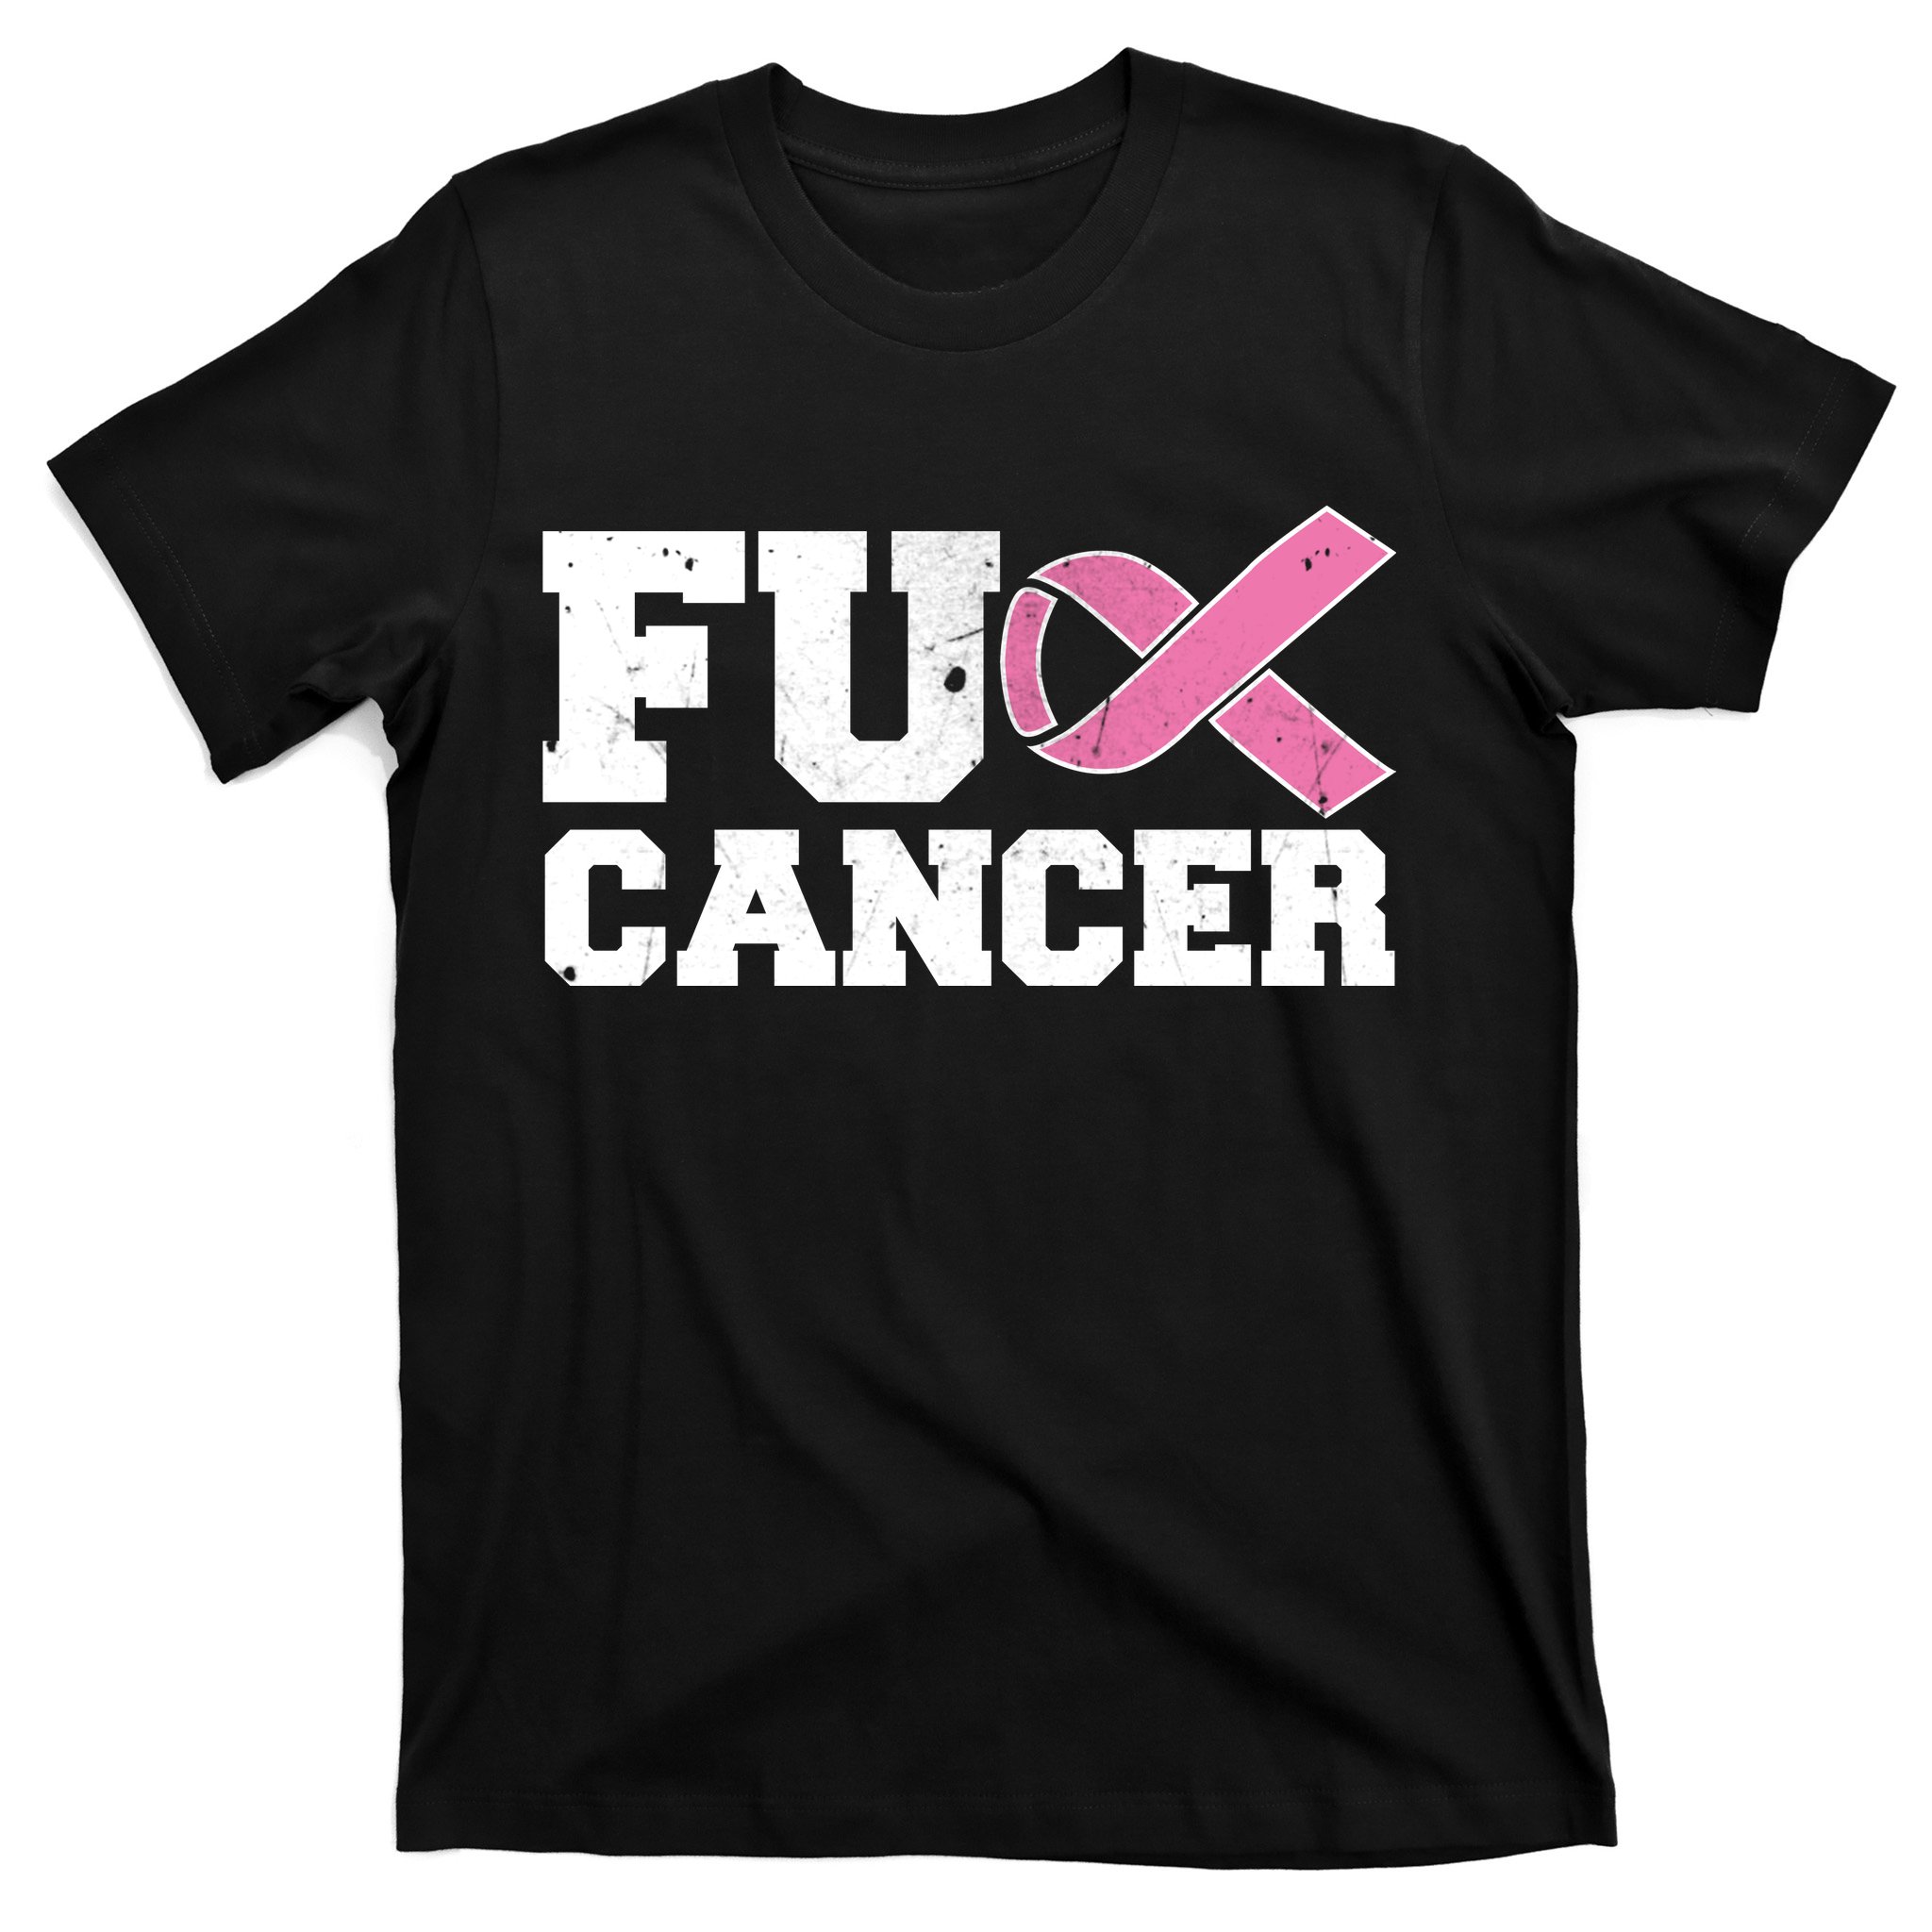 Cancer Warrior Tee Sarcastic Cancer Gift Breast Cancer Funny Cancer T-shirt Not Dead Yet Just Feel Like It Shirt Cancer Survivor Tee